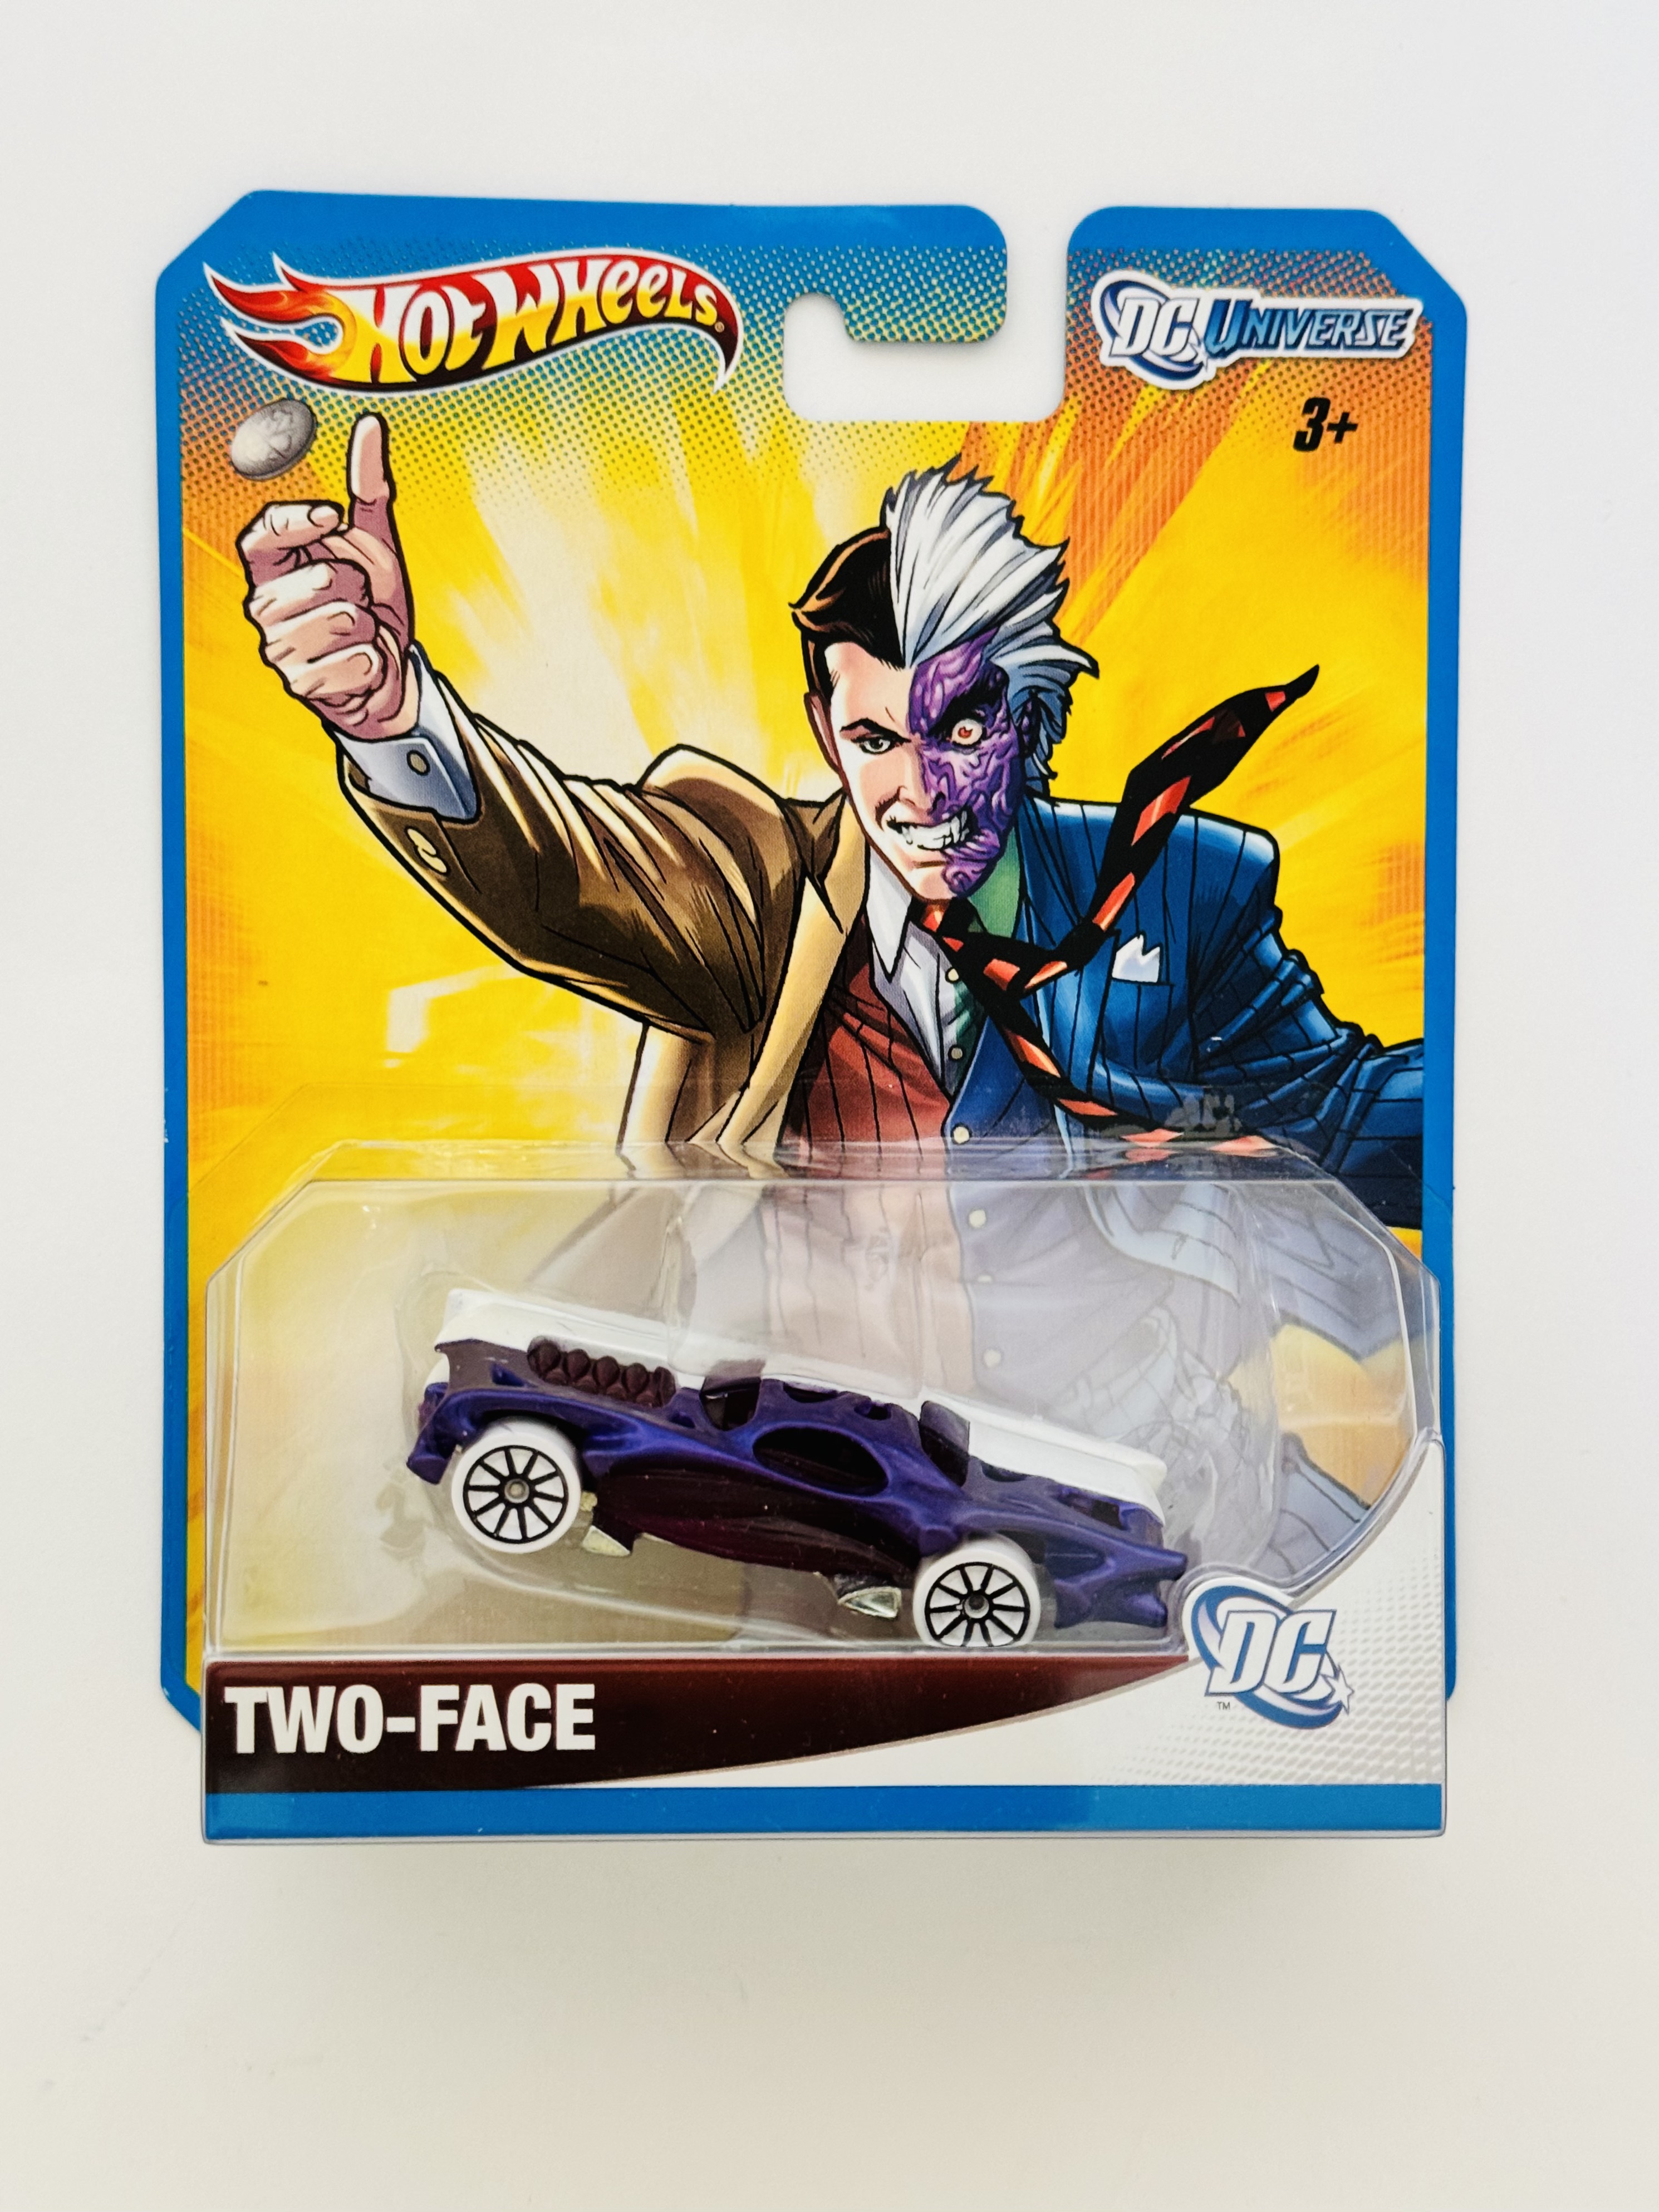 Hot Wheels DC Universe Two-Face